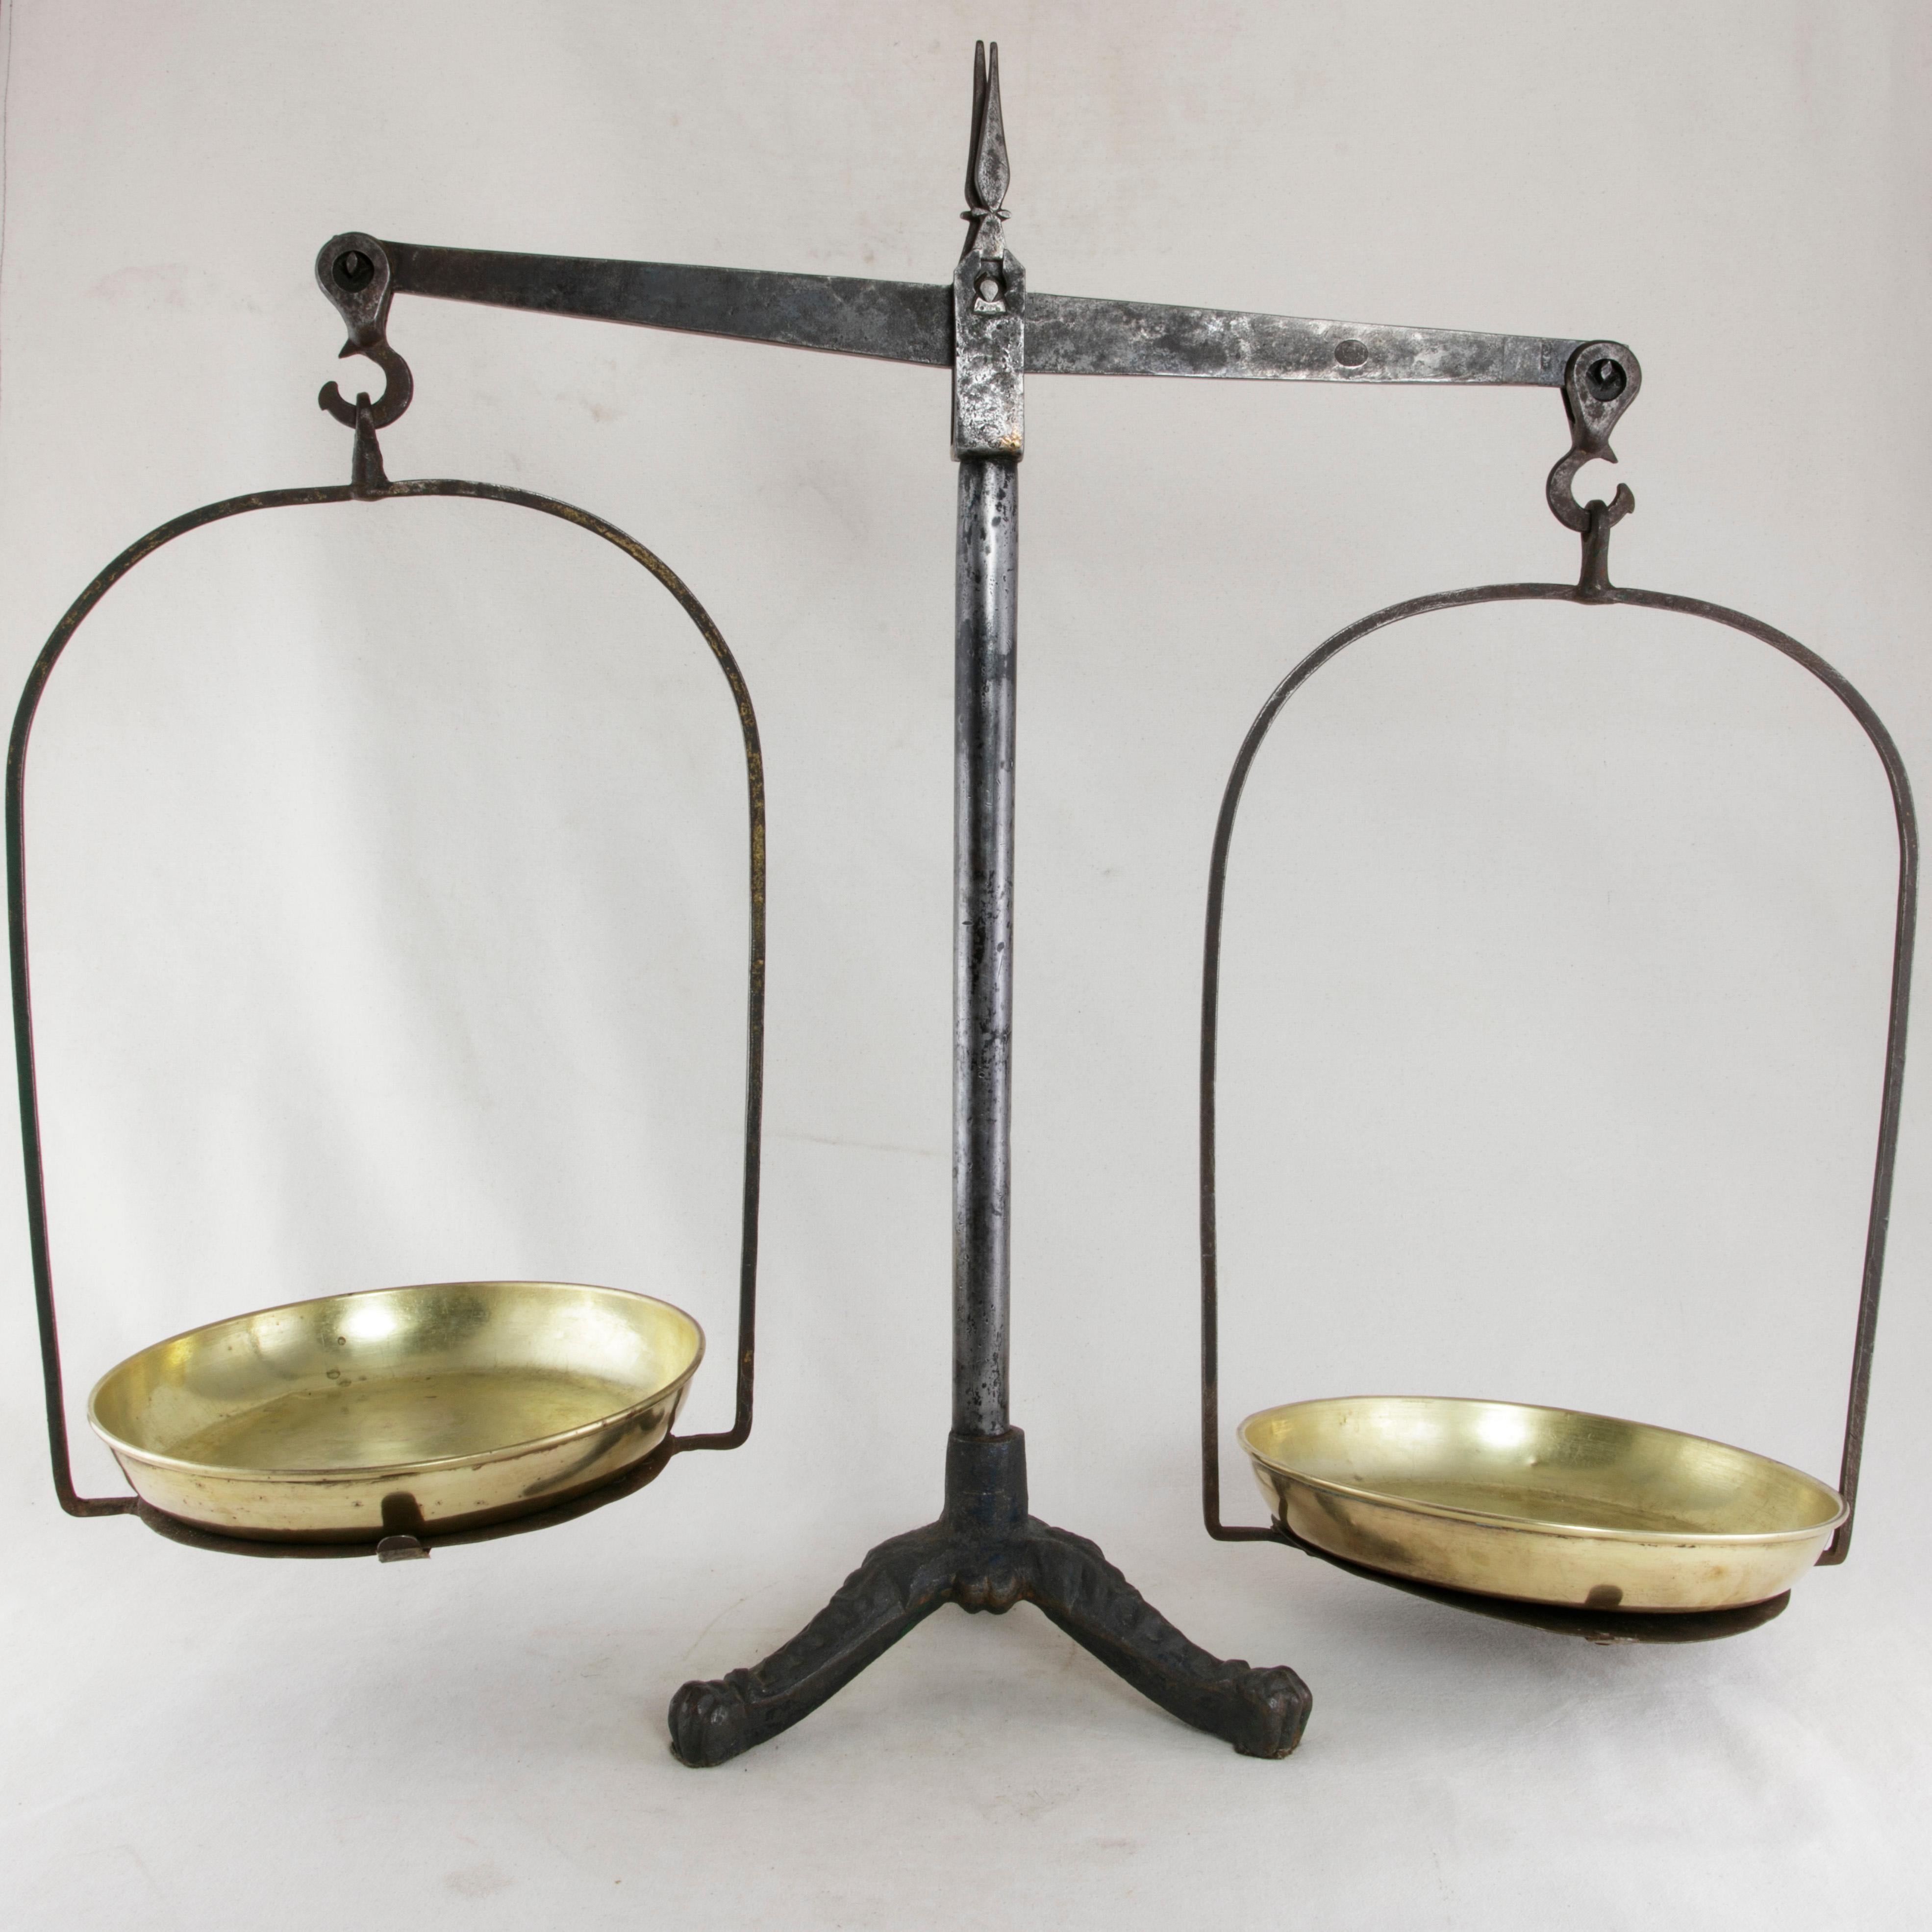 Set of Large Late 19th Century French Iron Scales with Brass Pans from Normandy 1